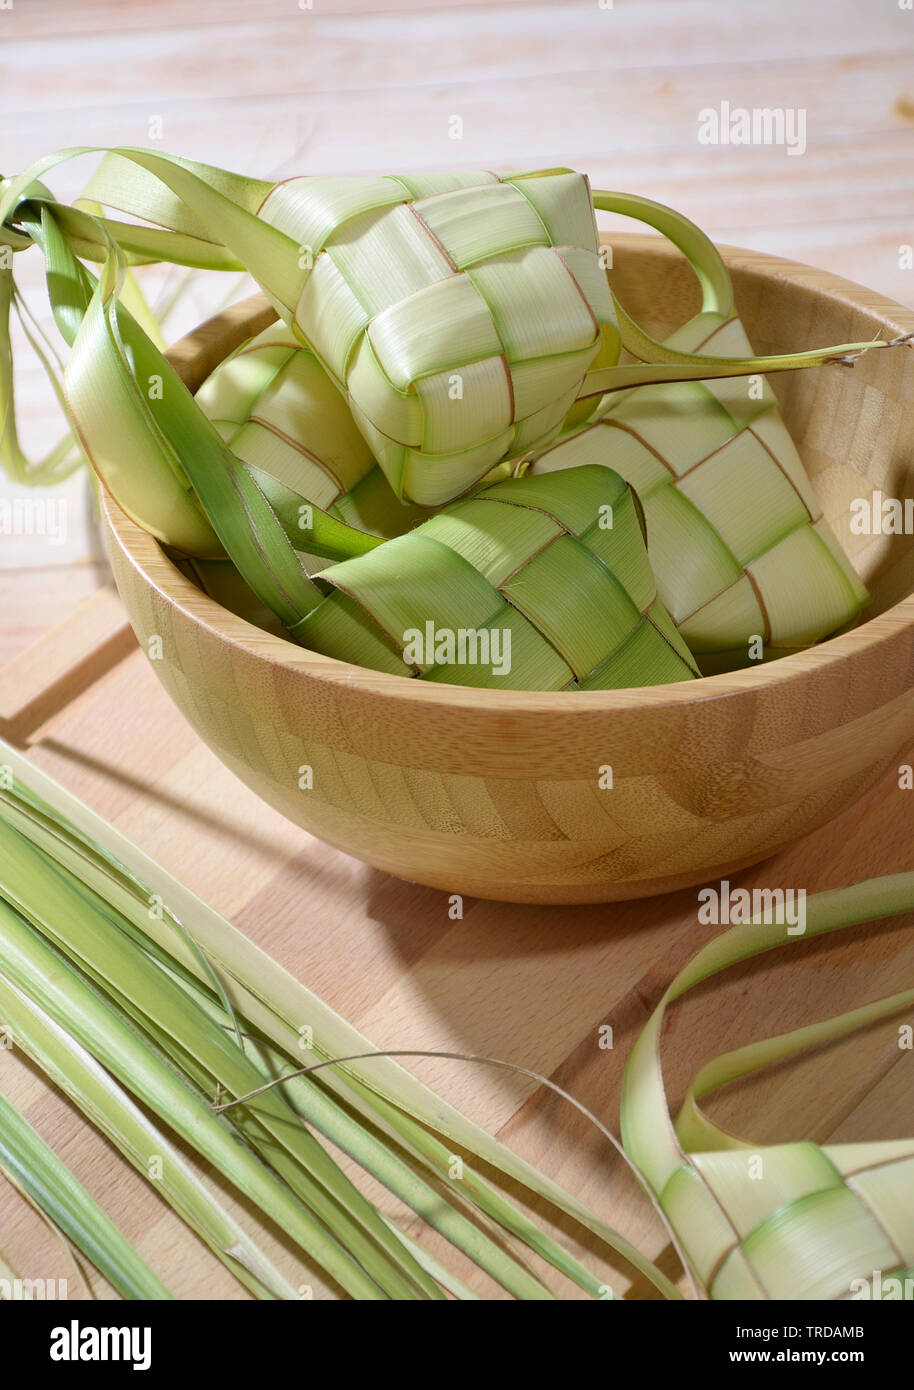 Ketupat, Rice Cake in Diamond Shape Pouch Made from Woven Coconut Leaves Stock Photo